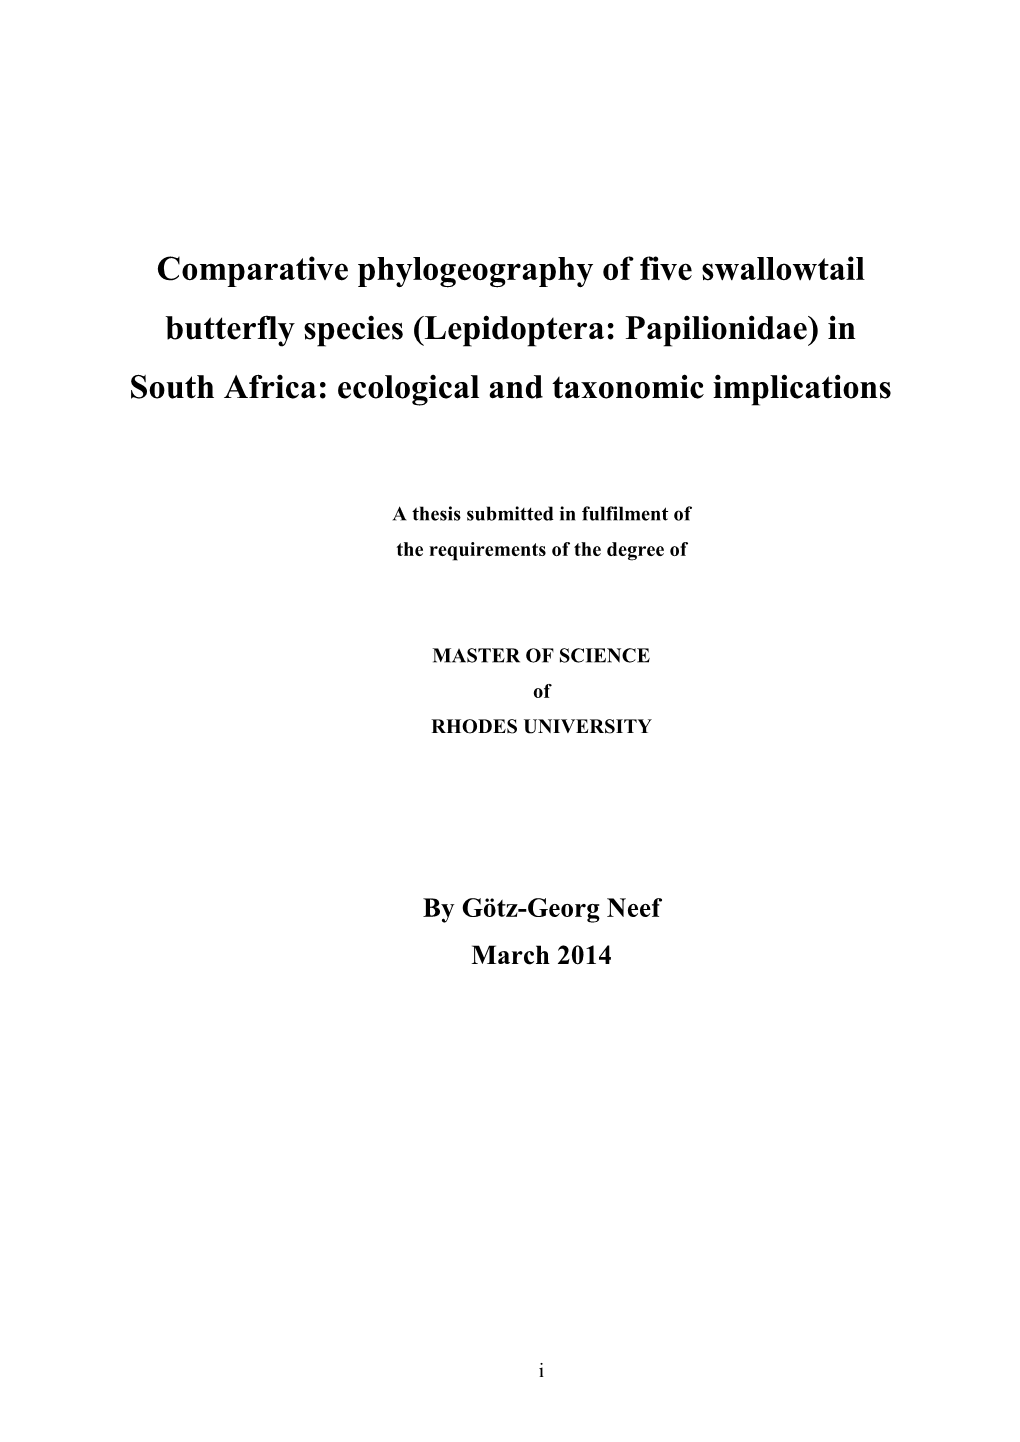 Comparative Phylogeography of Five Swallowtail Butterfly Species (Lepidoptera: Papilionidae) in South Africa: Ecological and Taxonomic Implications